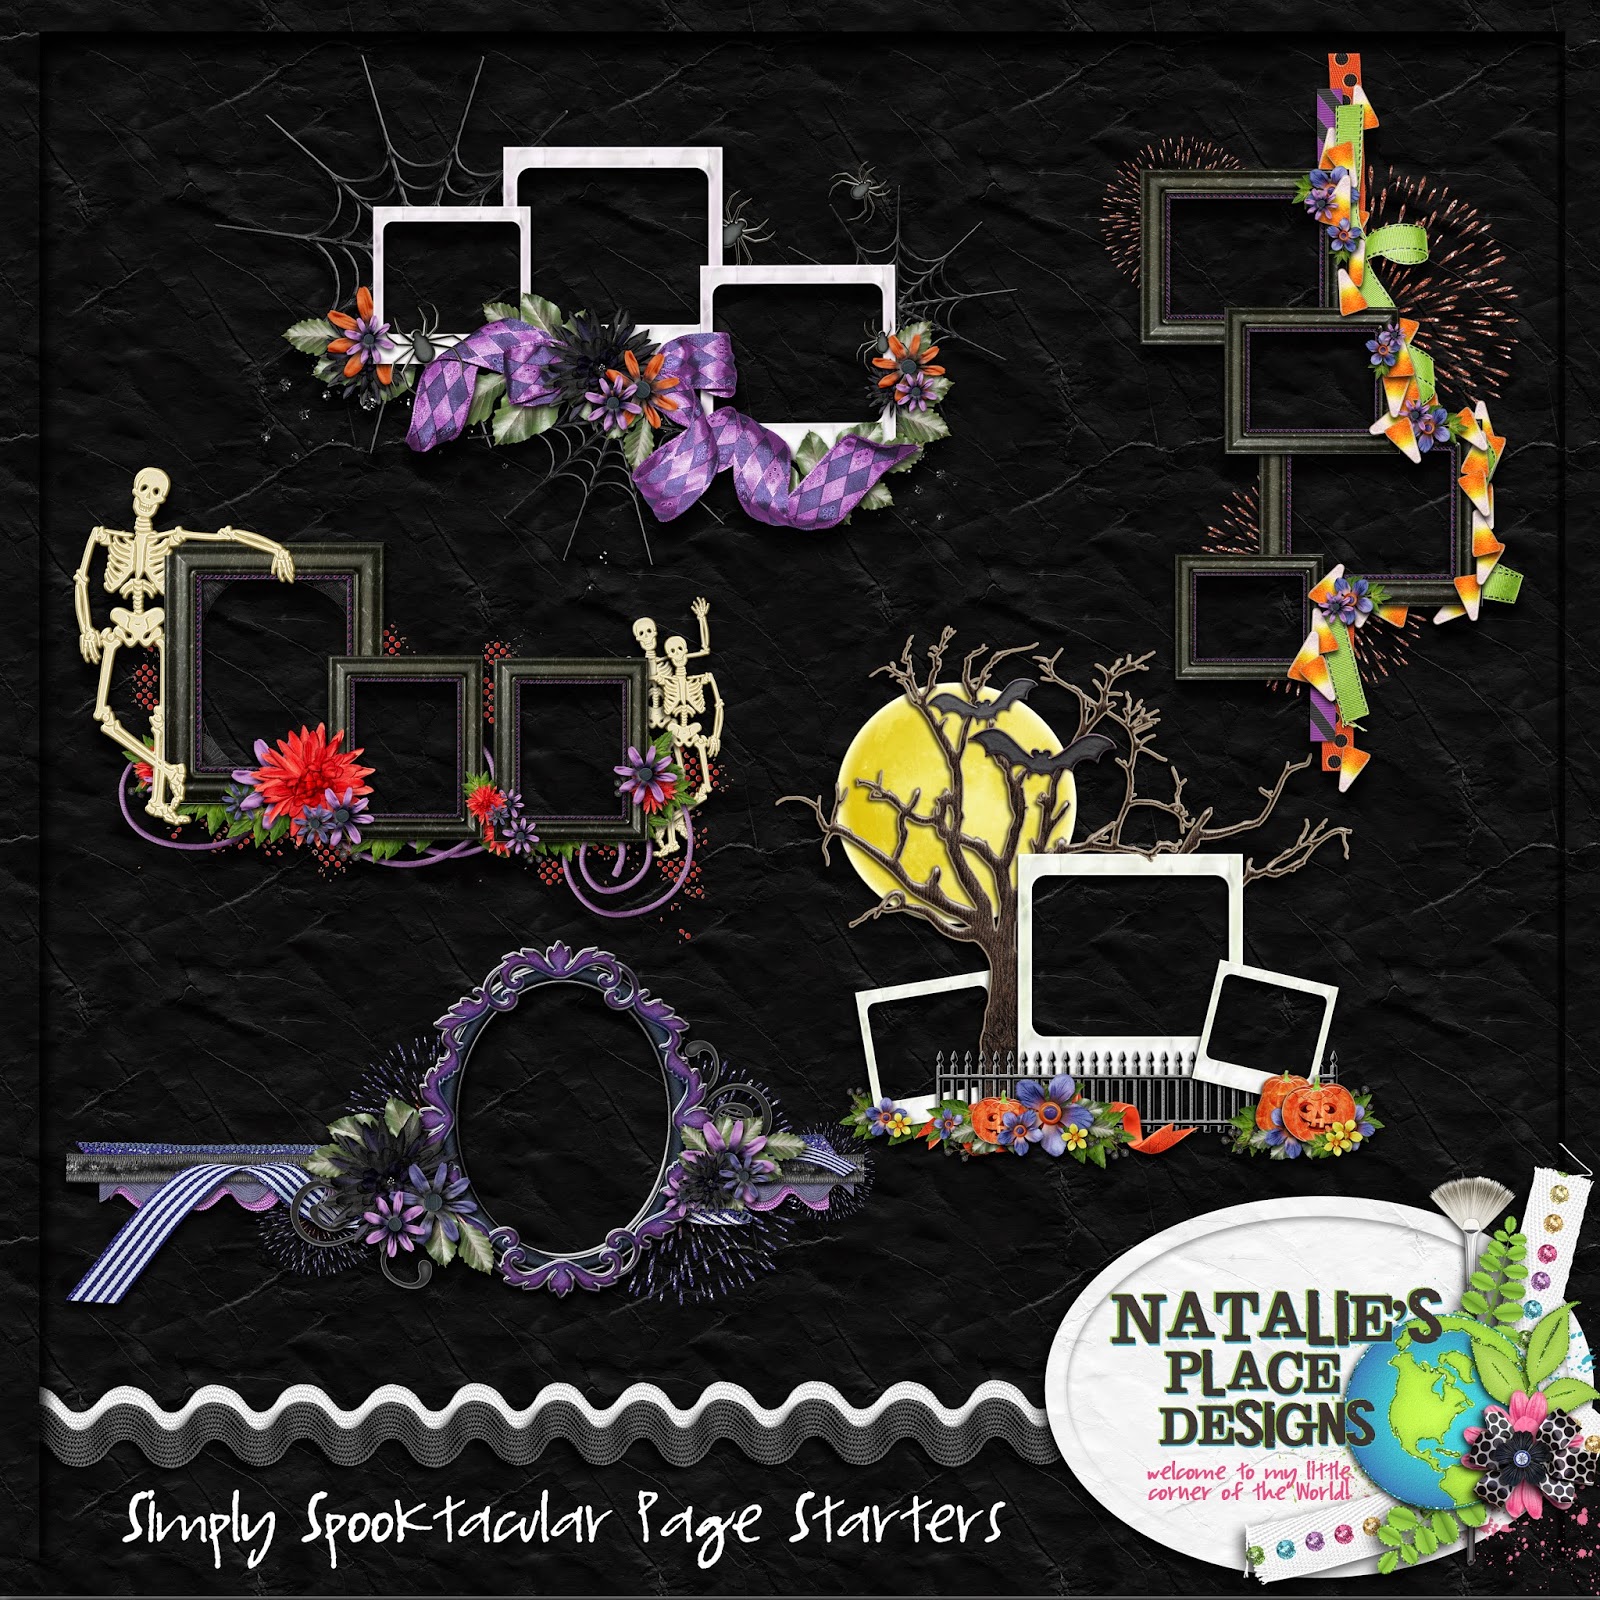 http://www.nataliesplacedesigns.com/store/p459/Simply_Spooktacular_Page_Starters.html